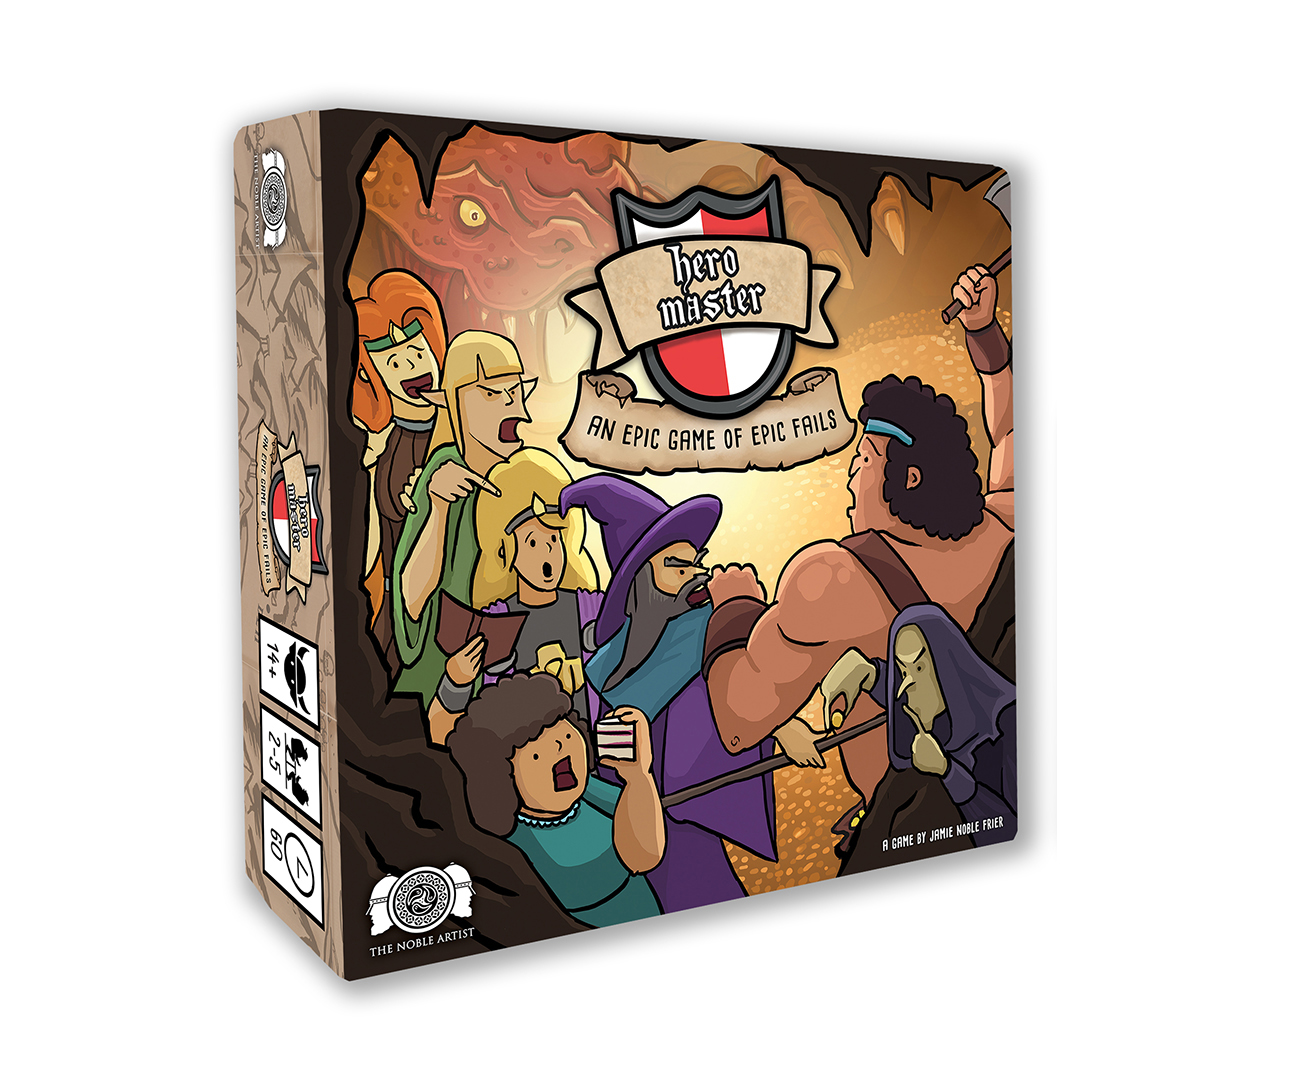 Board game box artwork 3D mockup by The Noble Artist